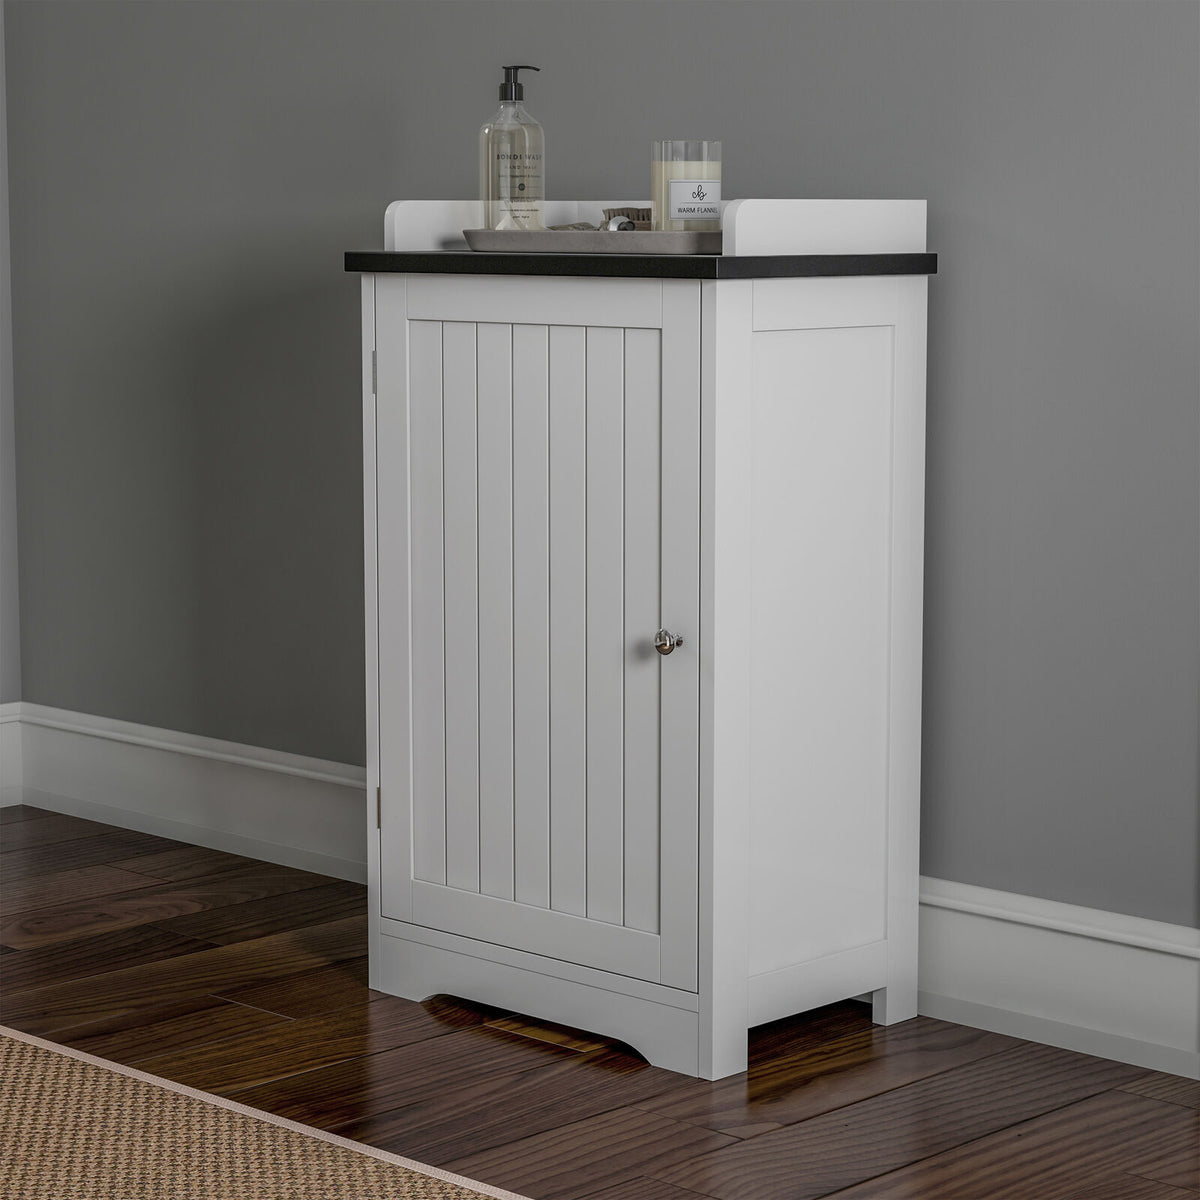 29-Inch Free-Standing White Bathroom Floor Cabinet with 2 Shelves